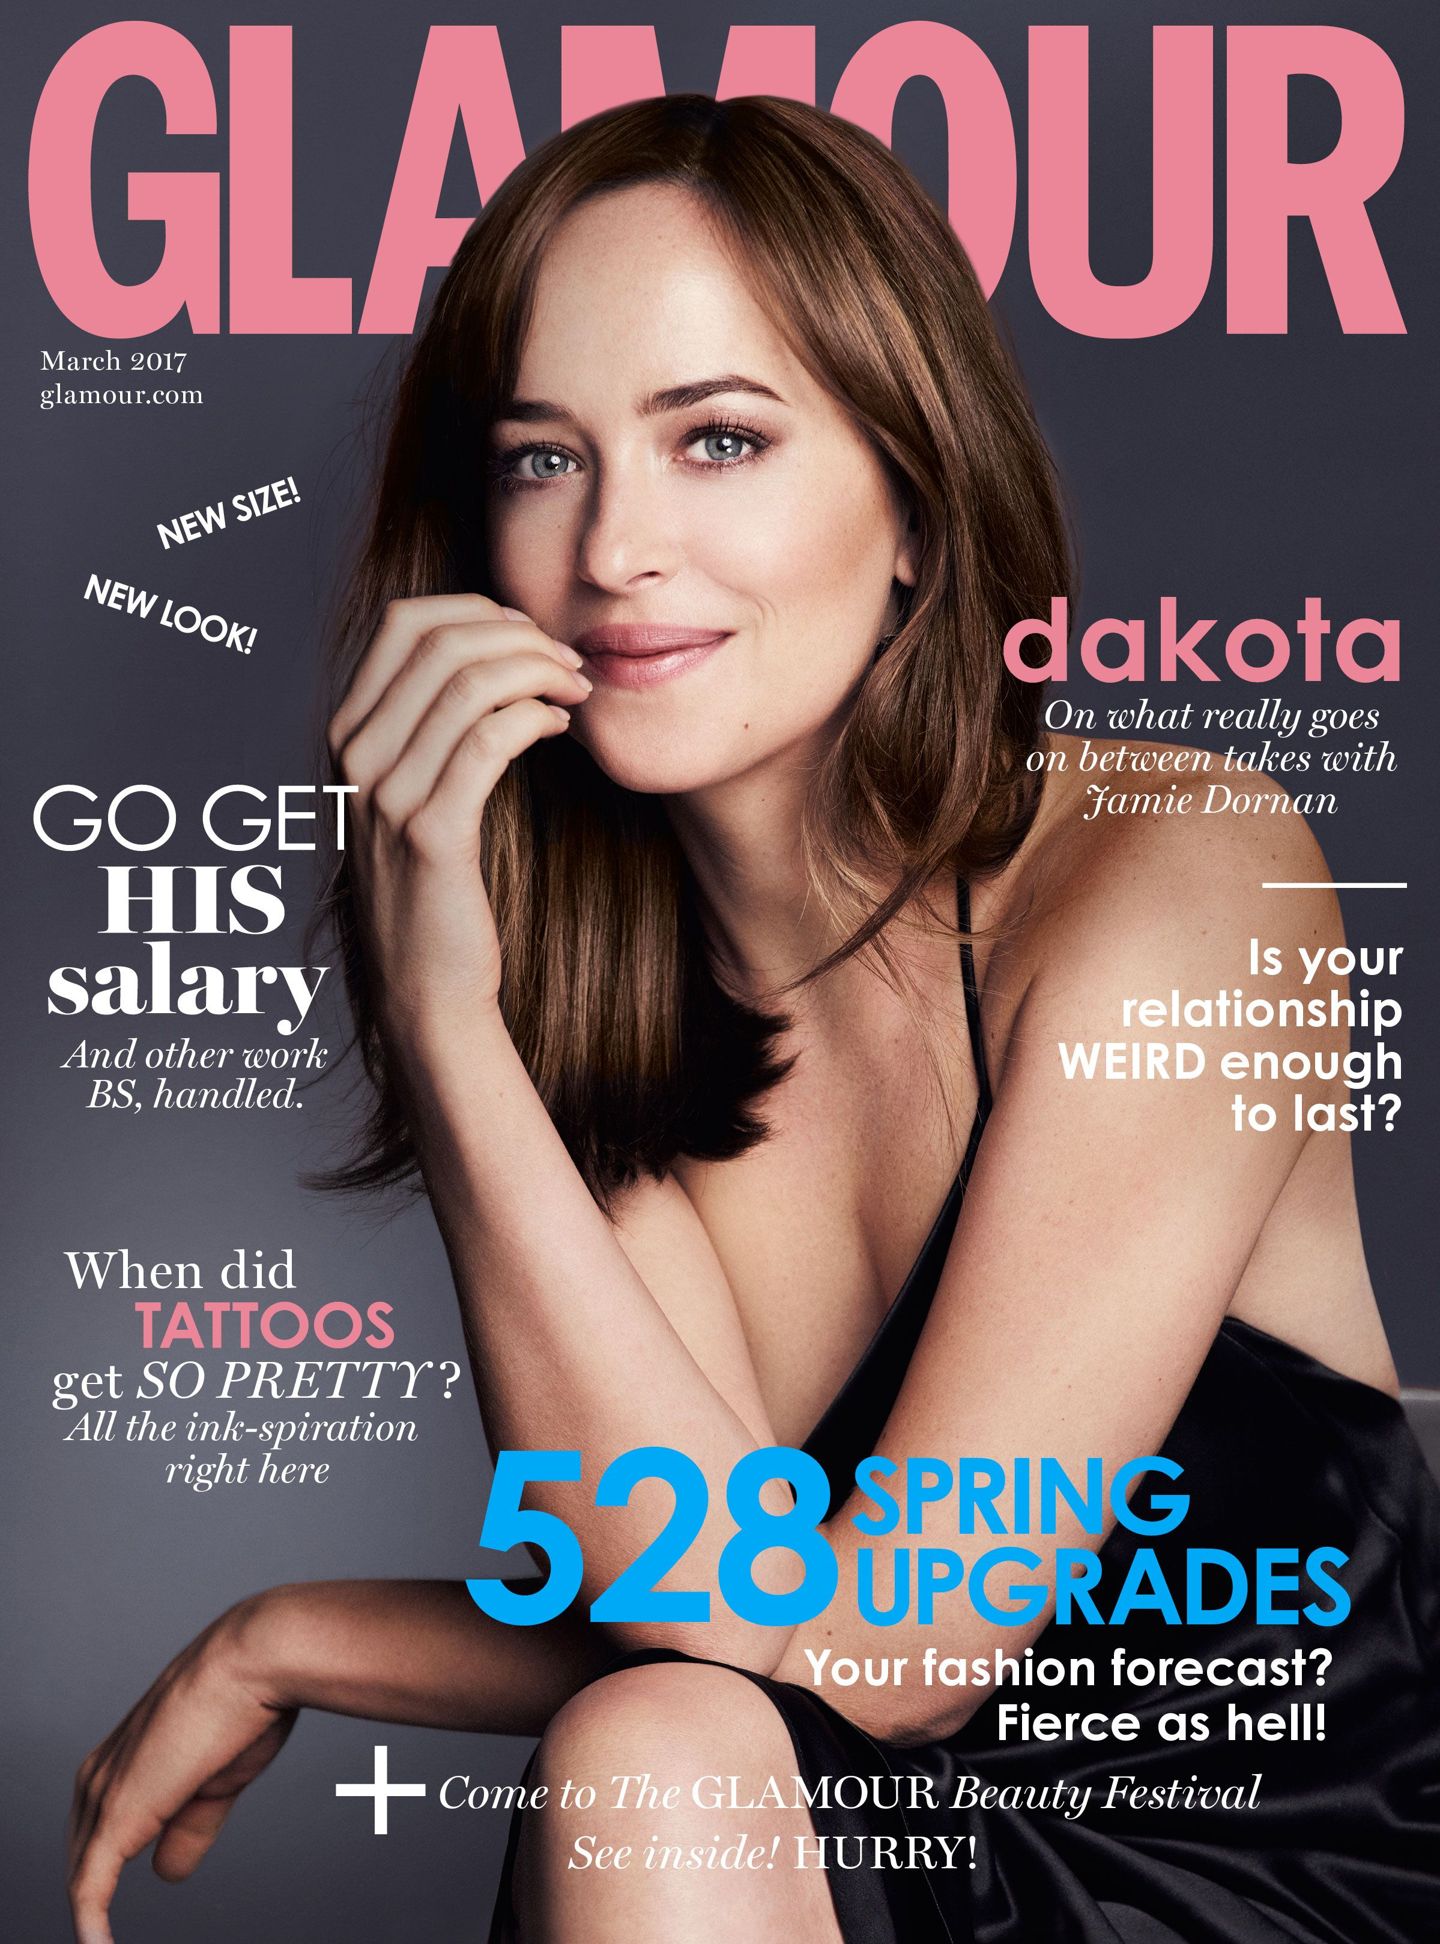 Dakota Johnson – the Fifty Shades of Grey star is the cover girl ...